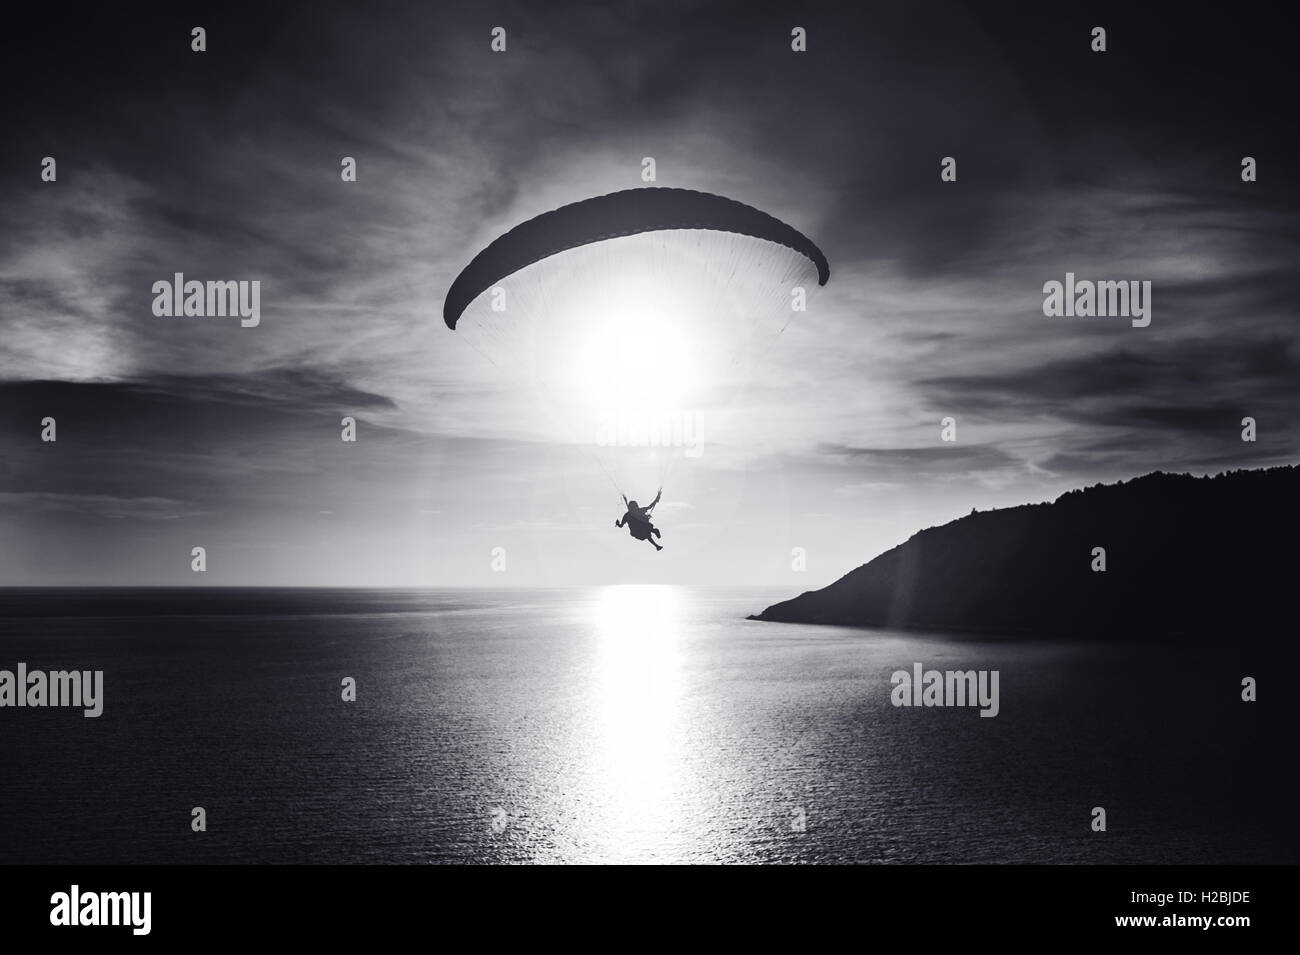 Sky diver flies at sunset over the bay. Black and white photo Stock Photo